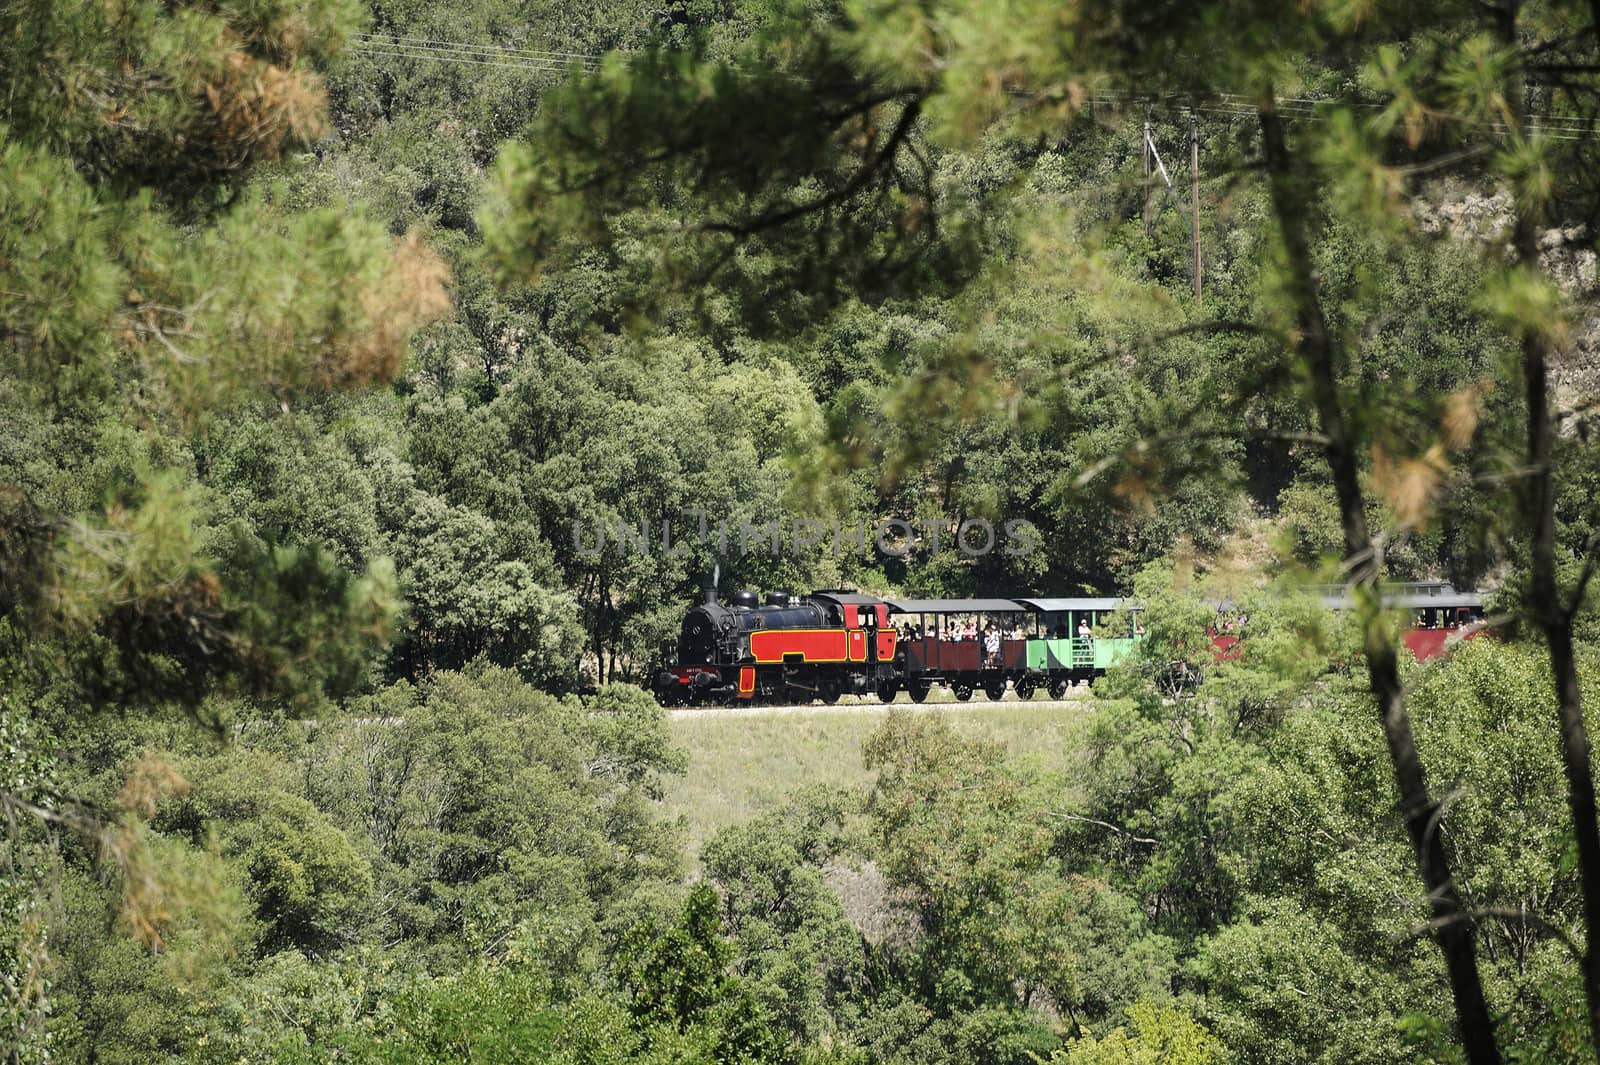 Little tourist steam train from Anduze going to Saint-Jean-du-Gard and just passed the viaduct Corbes